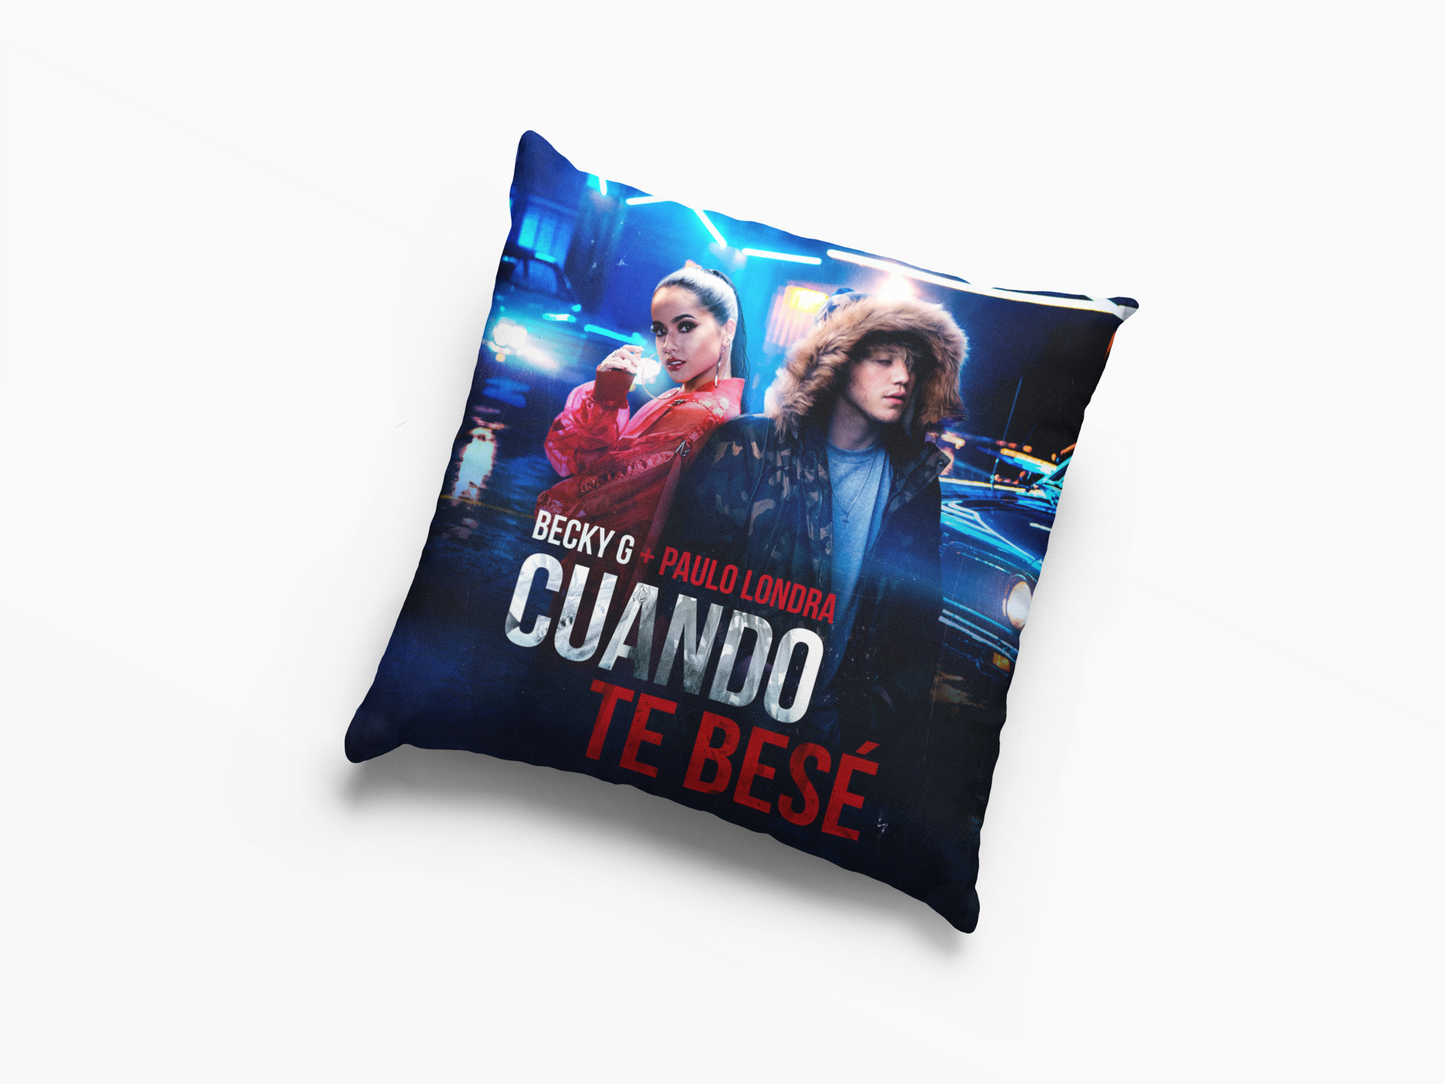 Becky G ft Paulo Londra Cuando Te Bese Cushion Case / Pillow Case